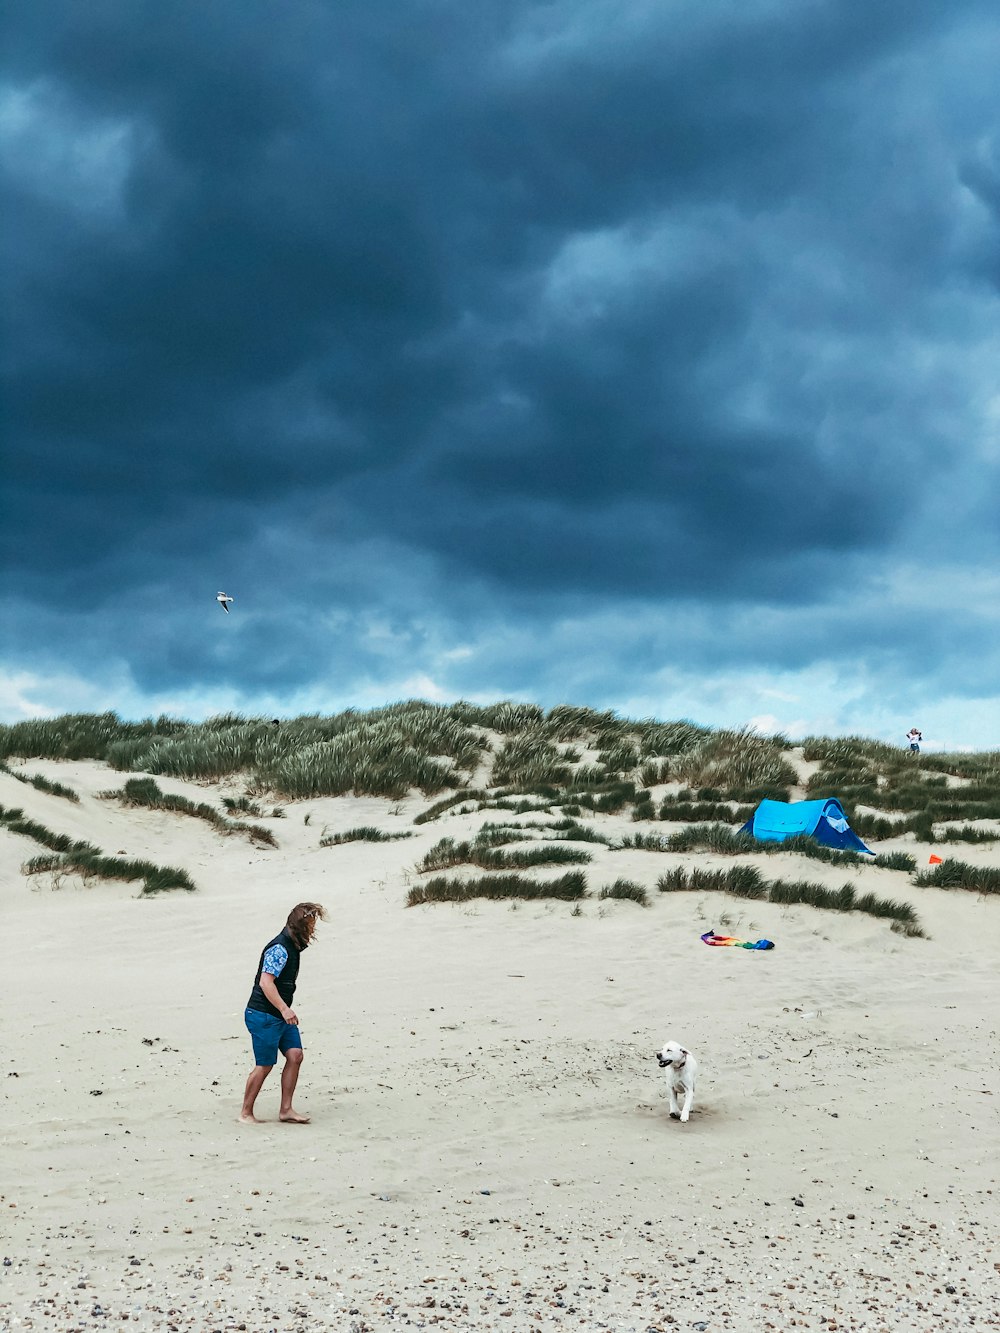 a person and a dog on a beach under a cloudy sky